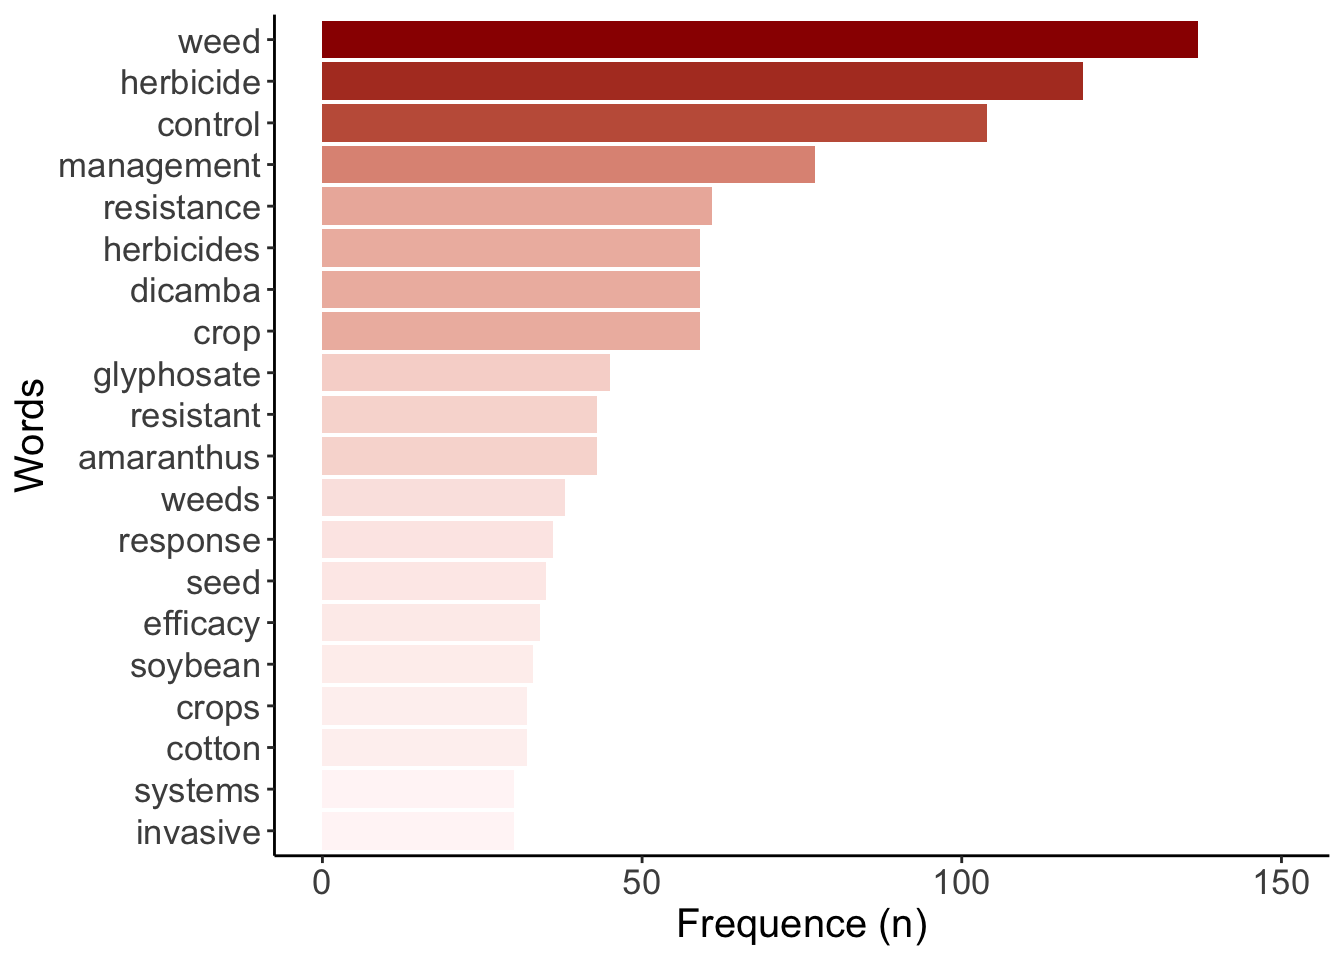 Most frequent words (n=30+) that appeared in the WSSA/WSWS oral and poster presentation titles.